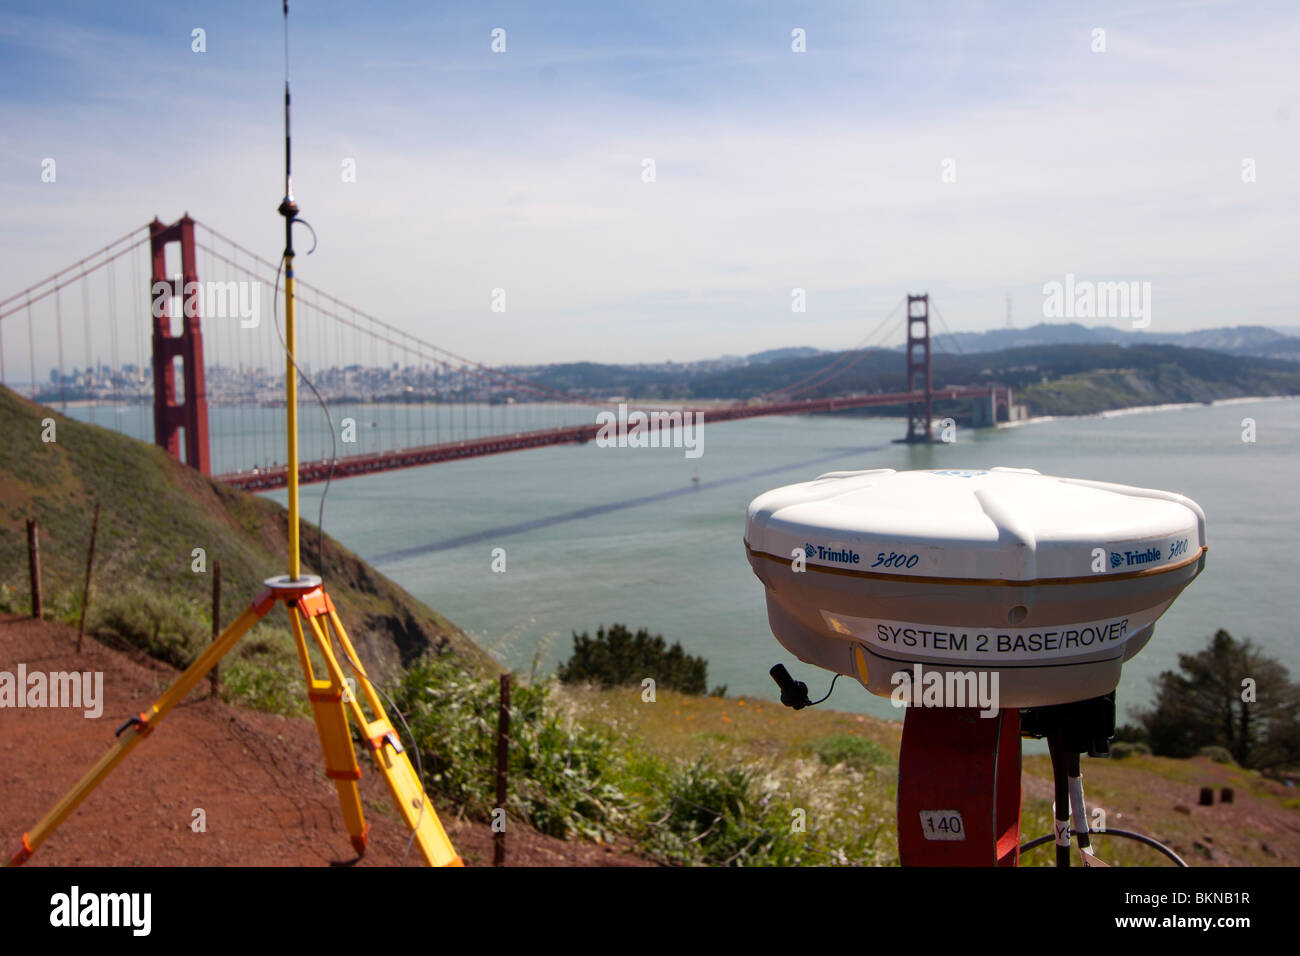 Surveying equipment near the Golden Gate Bridge, presumably for monitoring of the San Andreas Fault. Stock Photo